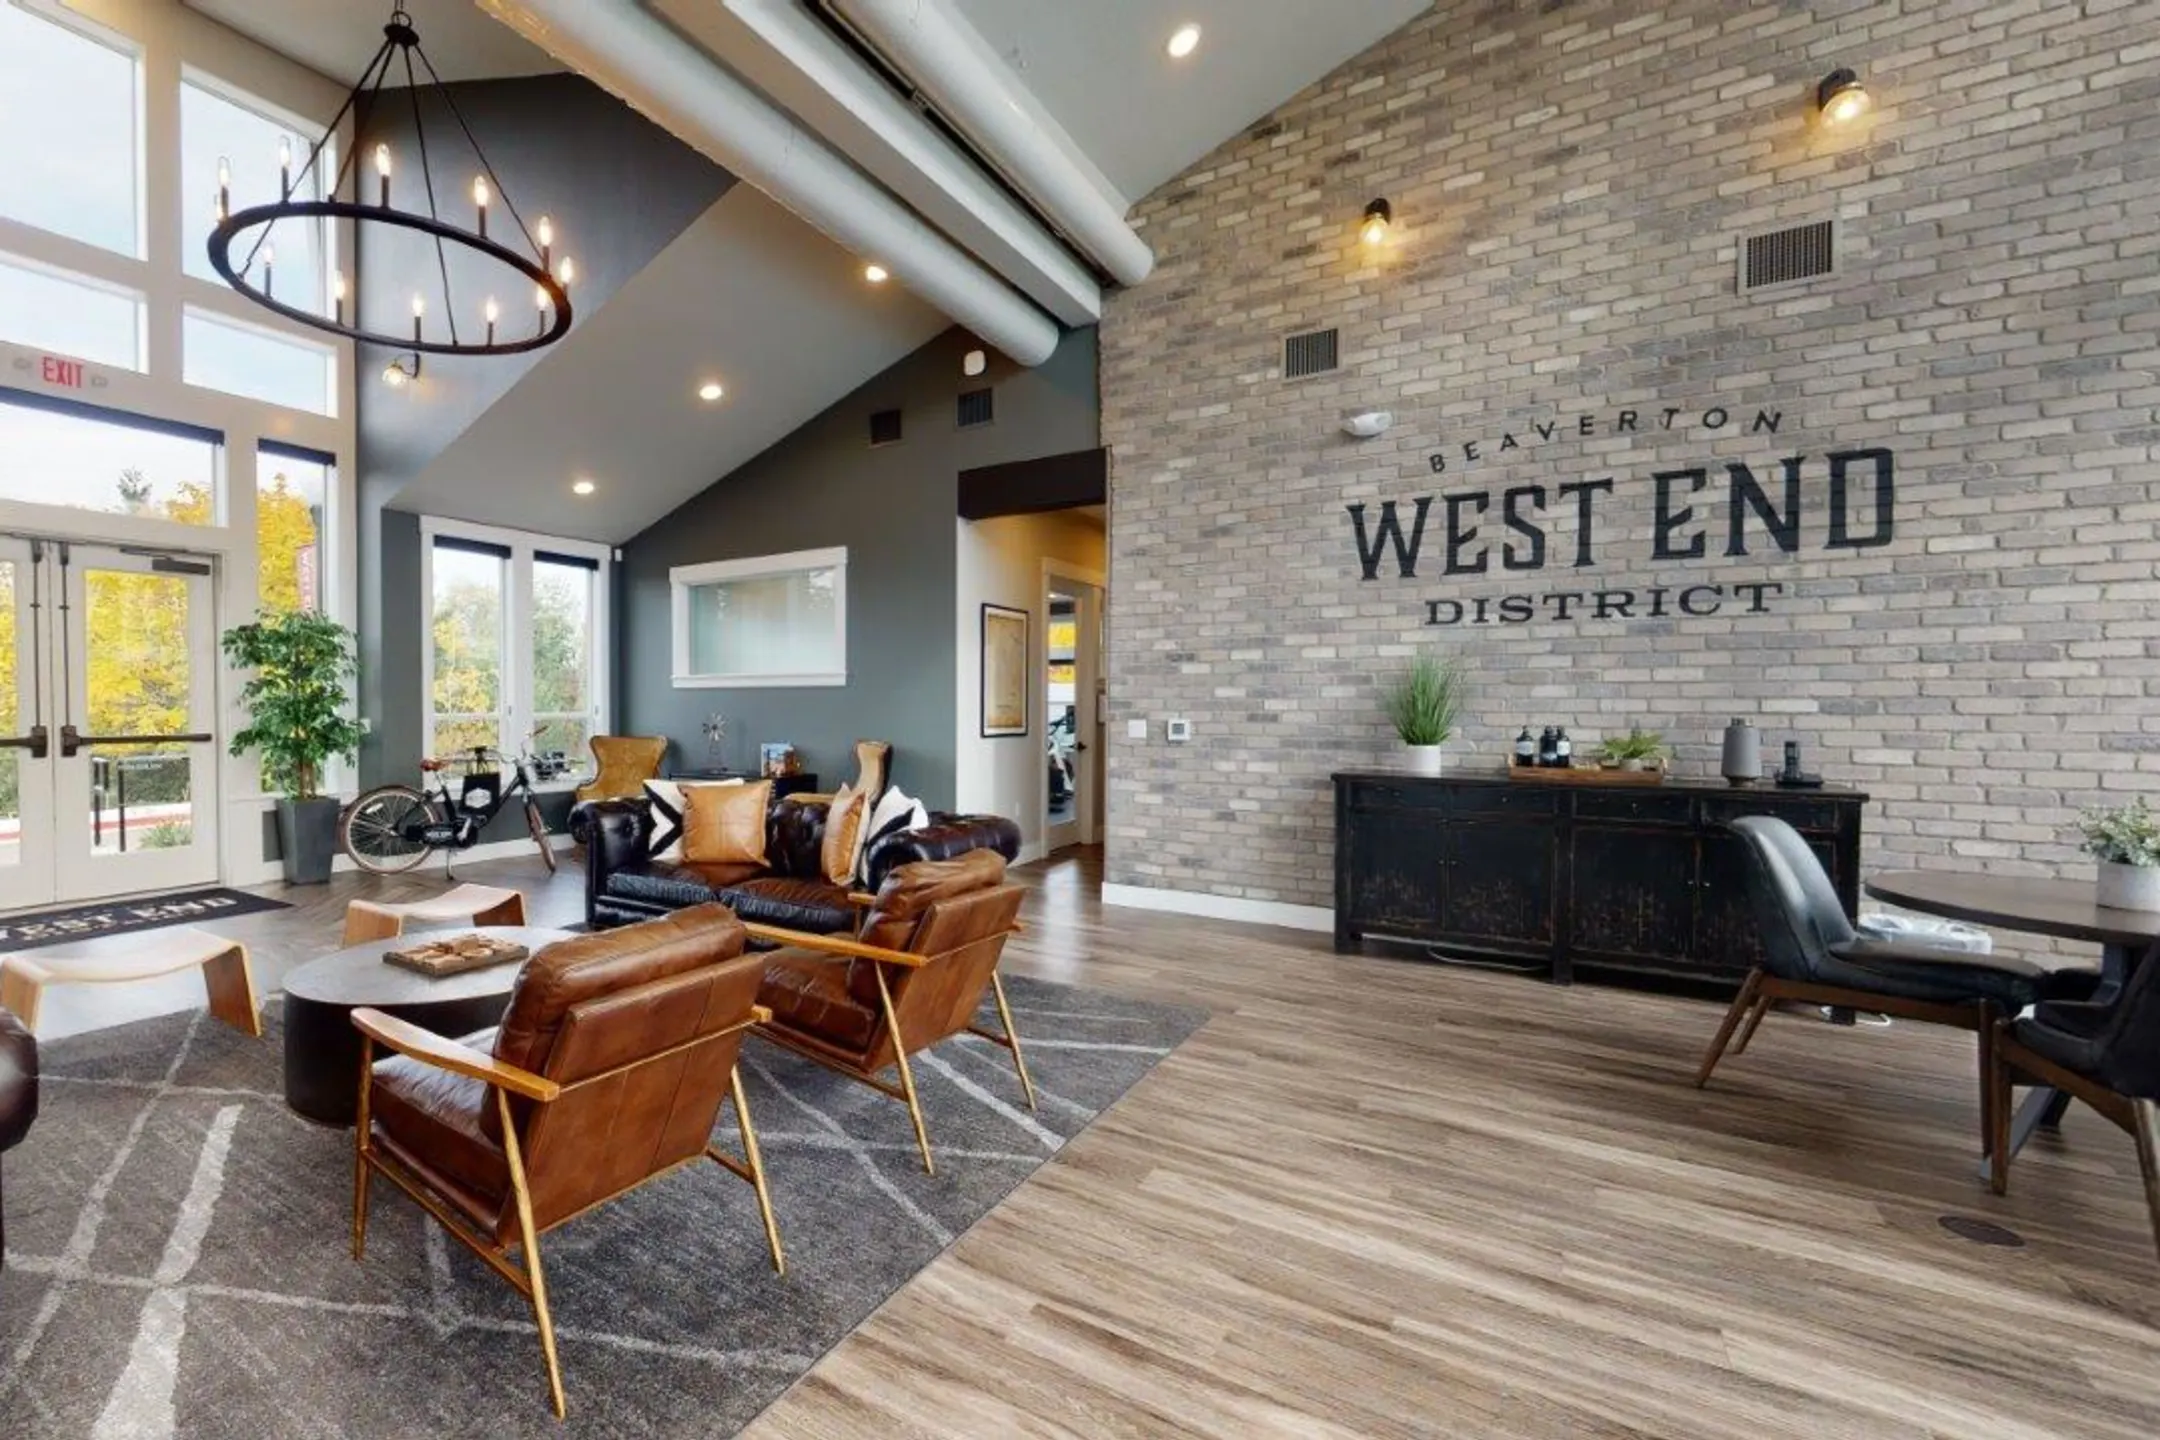 Dining Room - West End District - Beaverton, OR